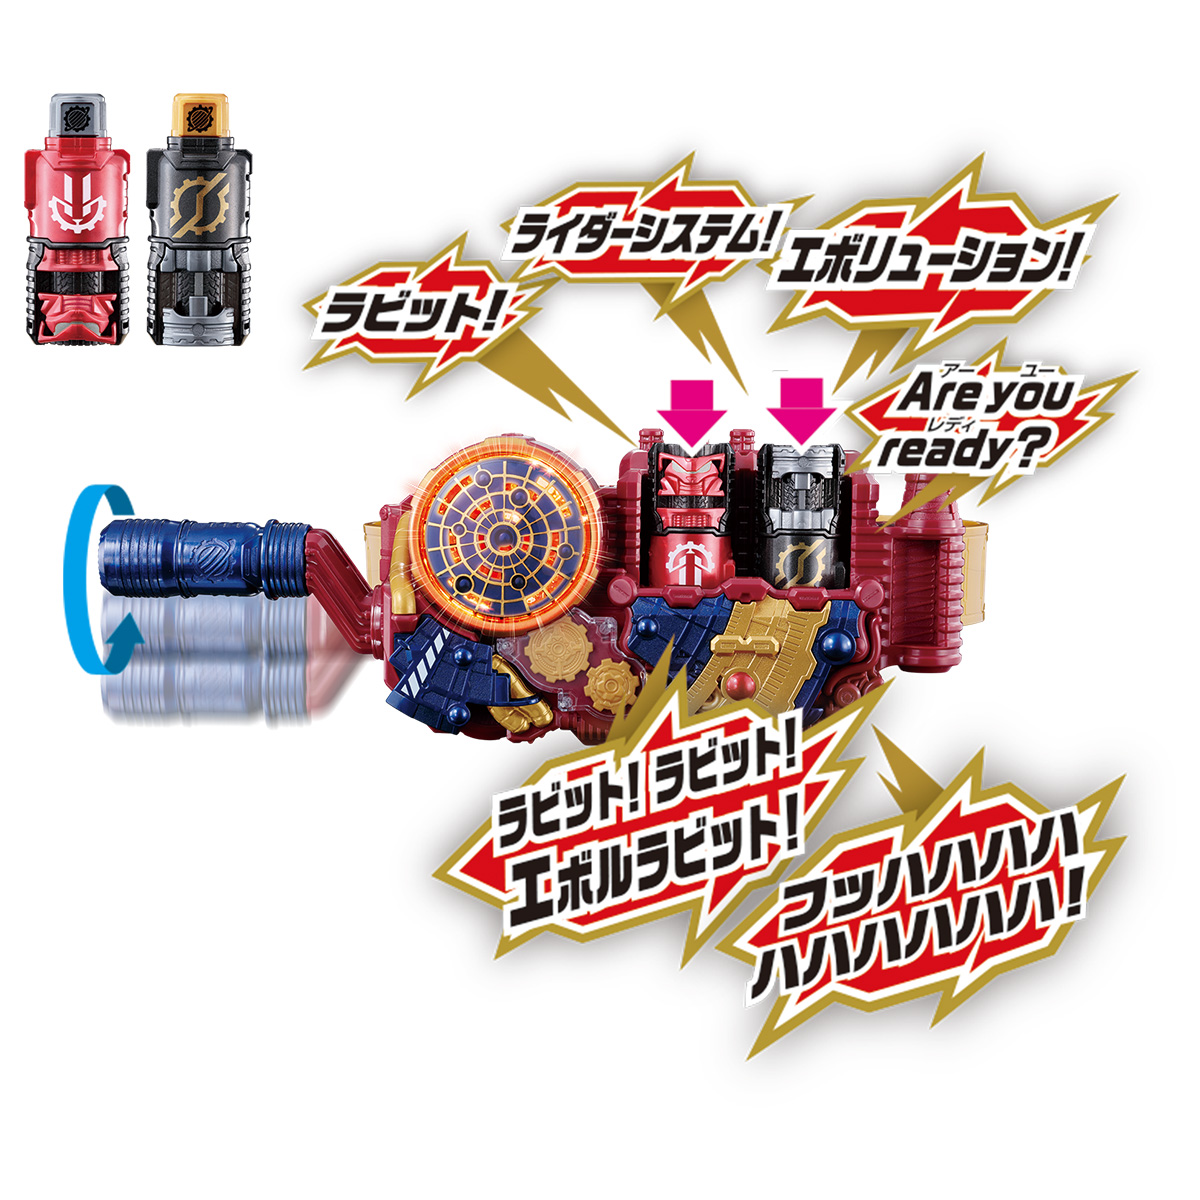 SUPER BEST DXエボルドライバー 仮面ライダーエボルフェーズ1 to 4セット